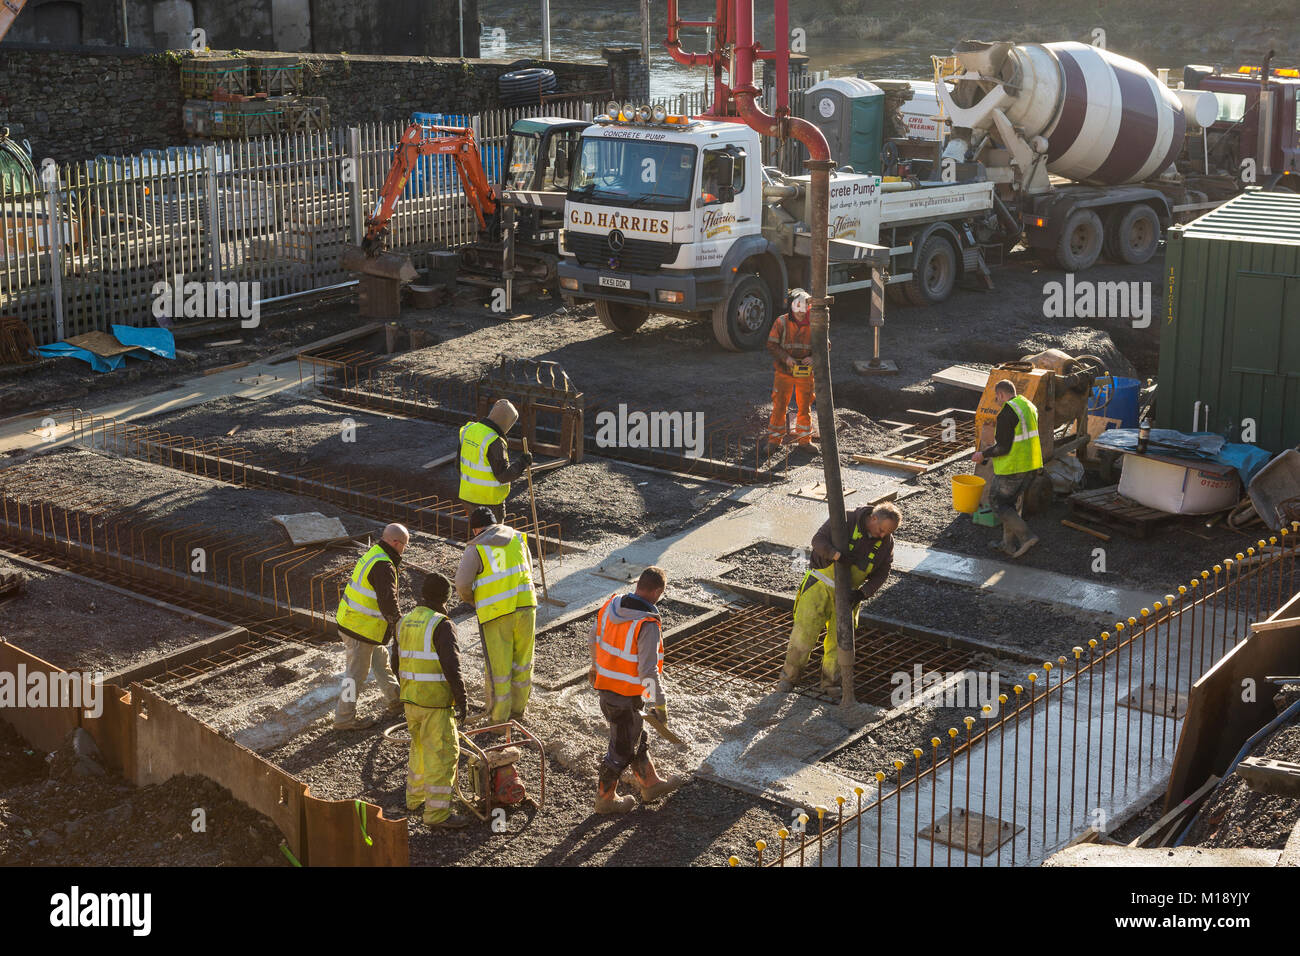 Workmen  in high visibility flourescent jackets on building, pouring concrete into foundations Stock Photo